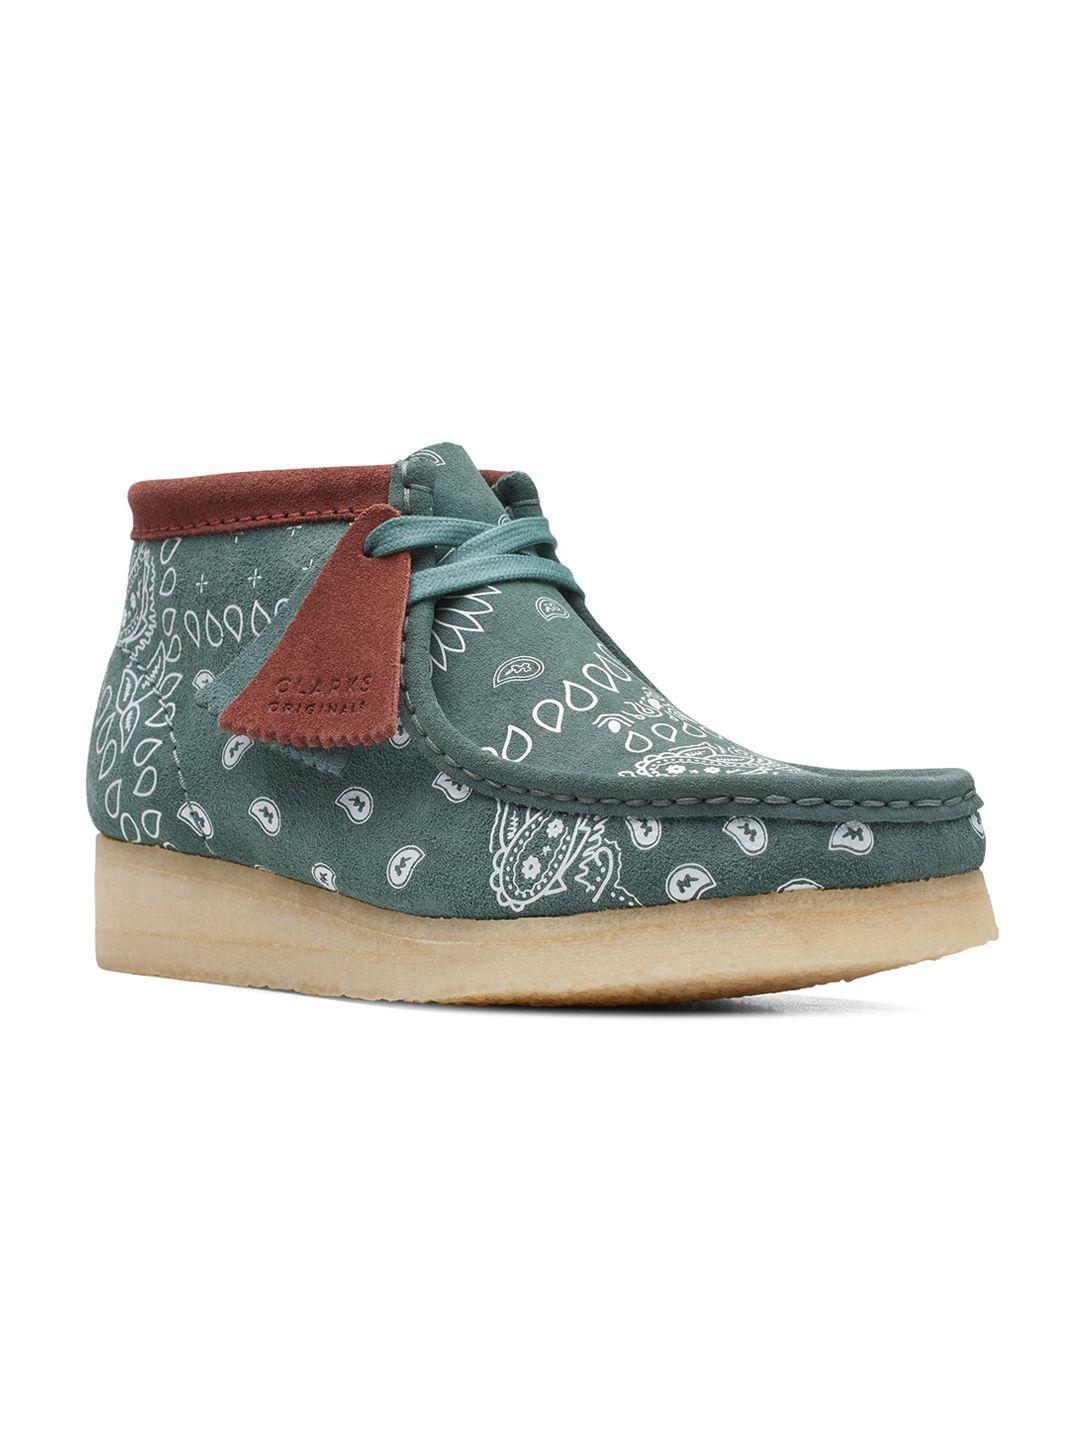 clarks women green printed casual boots